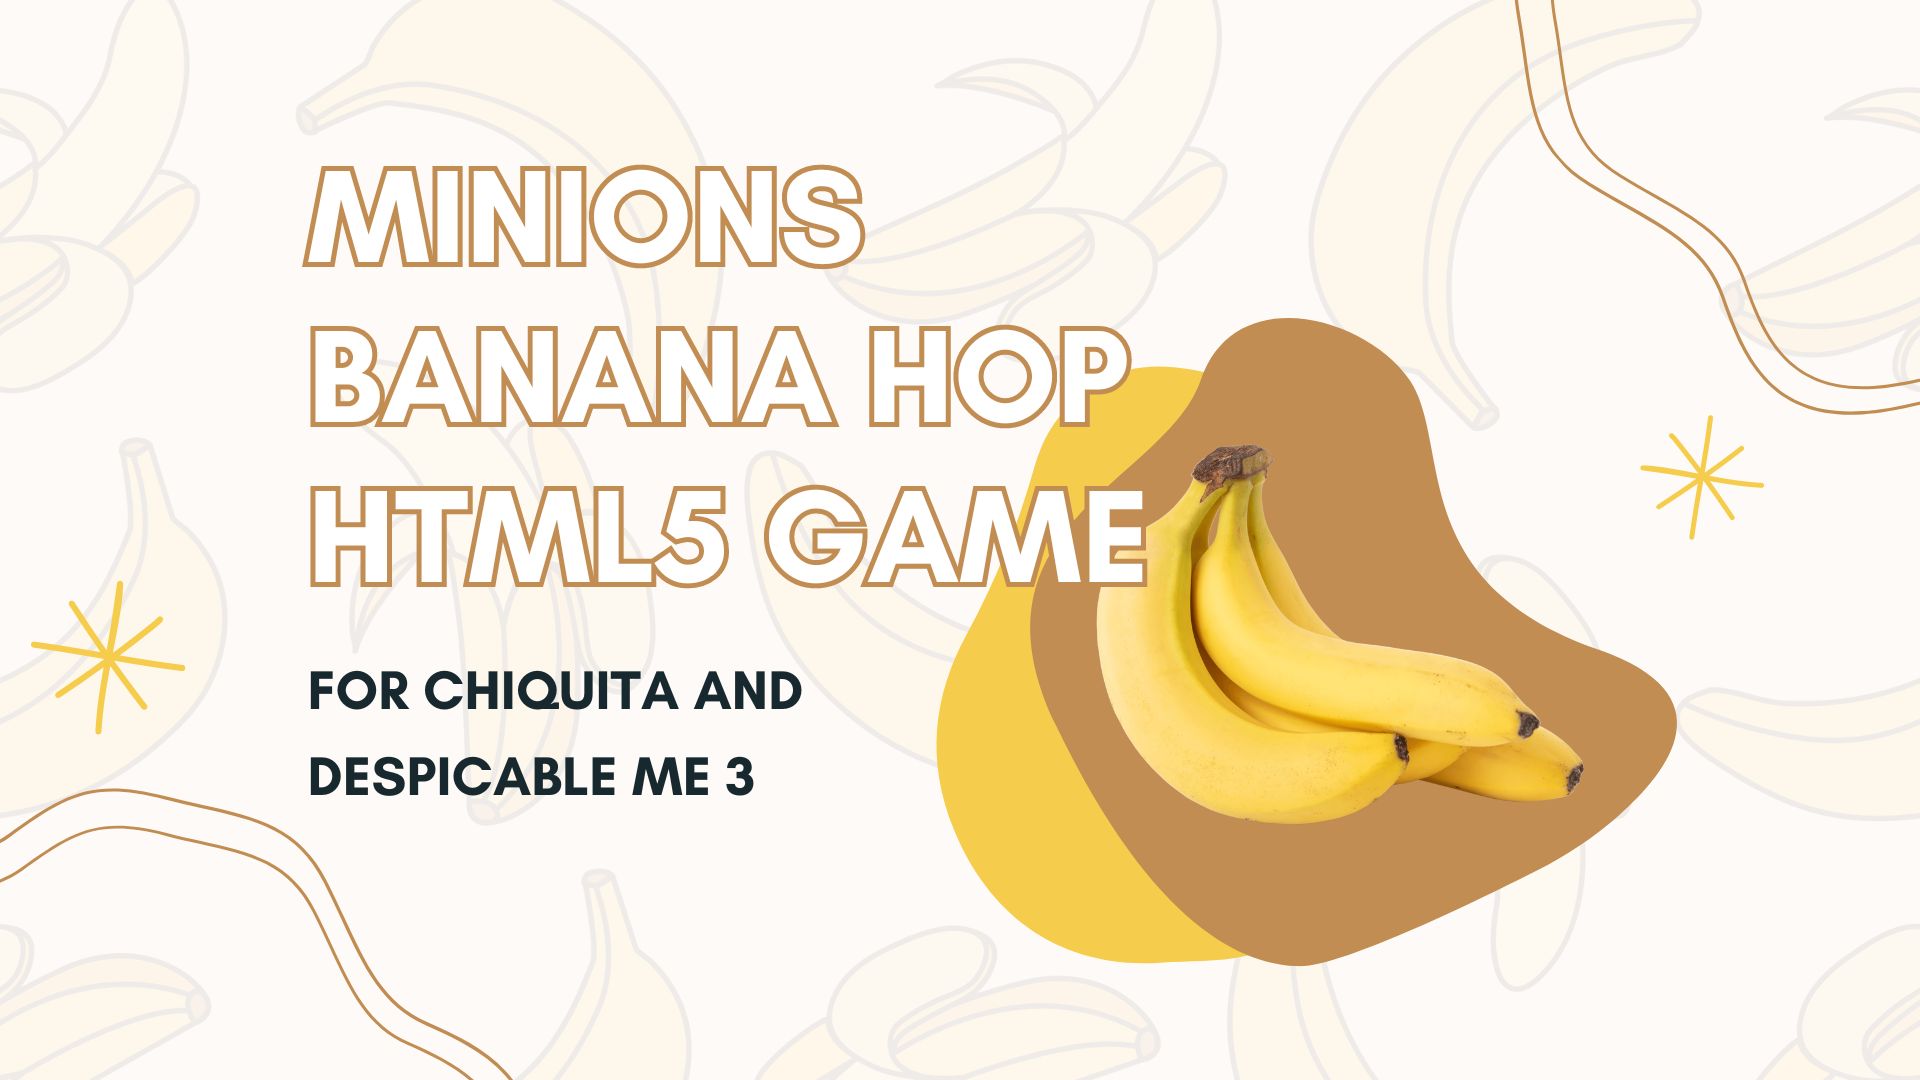 Minions Banana Hop HTML5 Game for Chiquita and Despicable Me 3